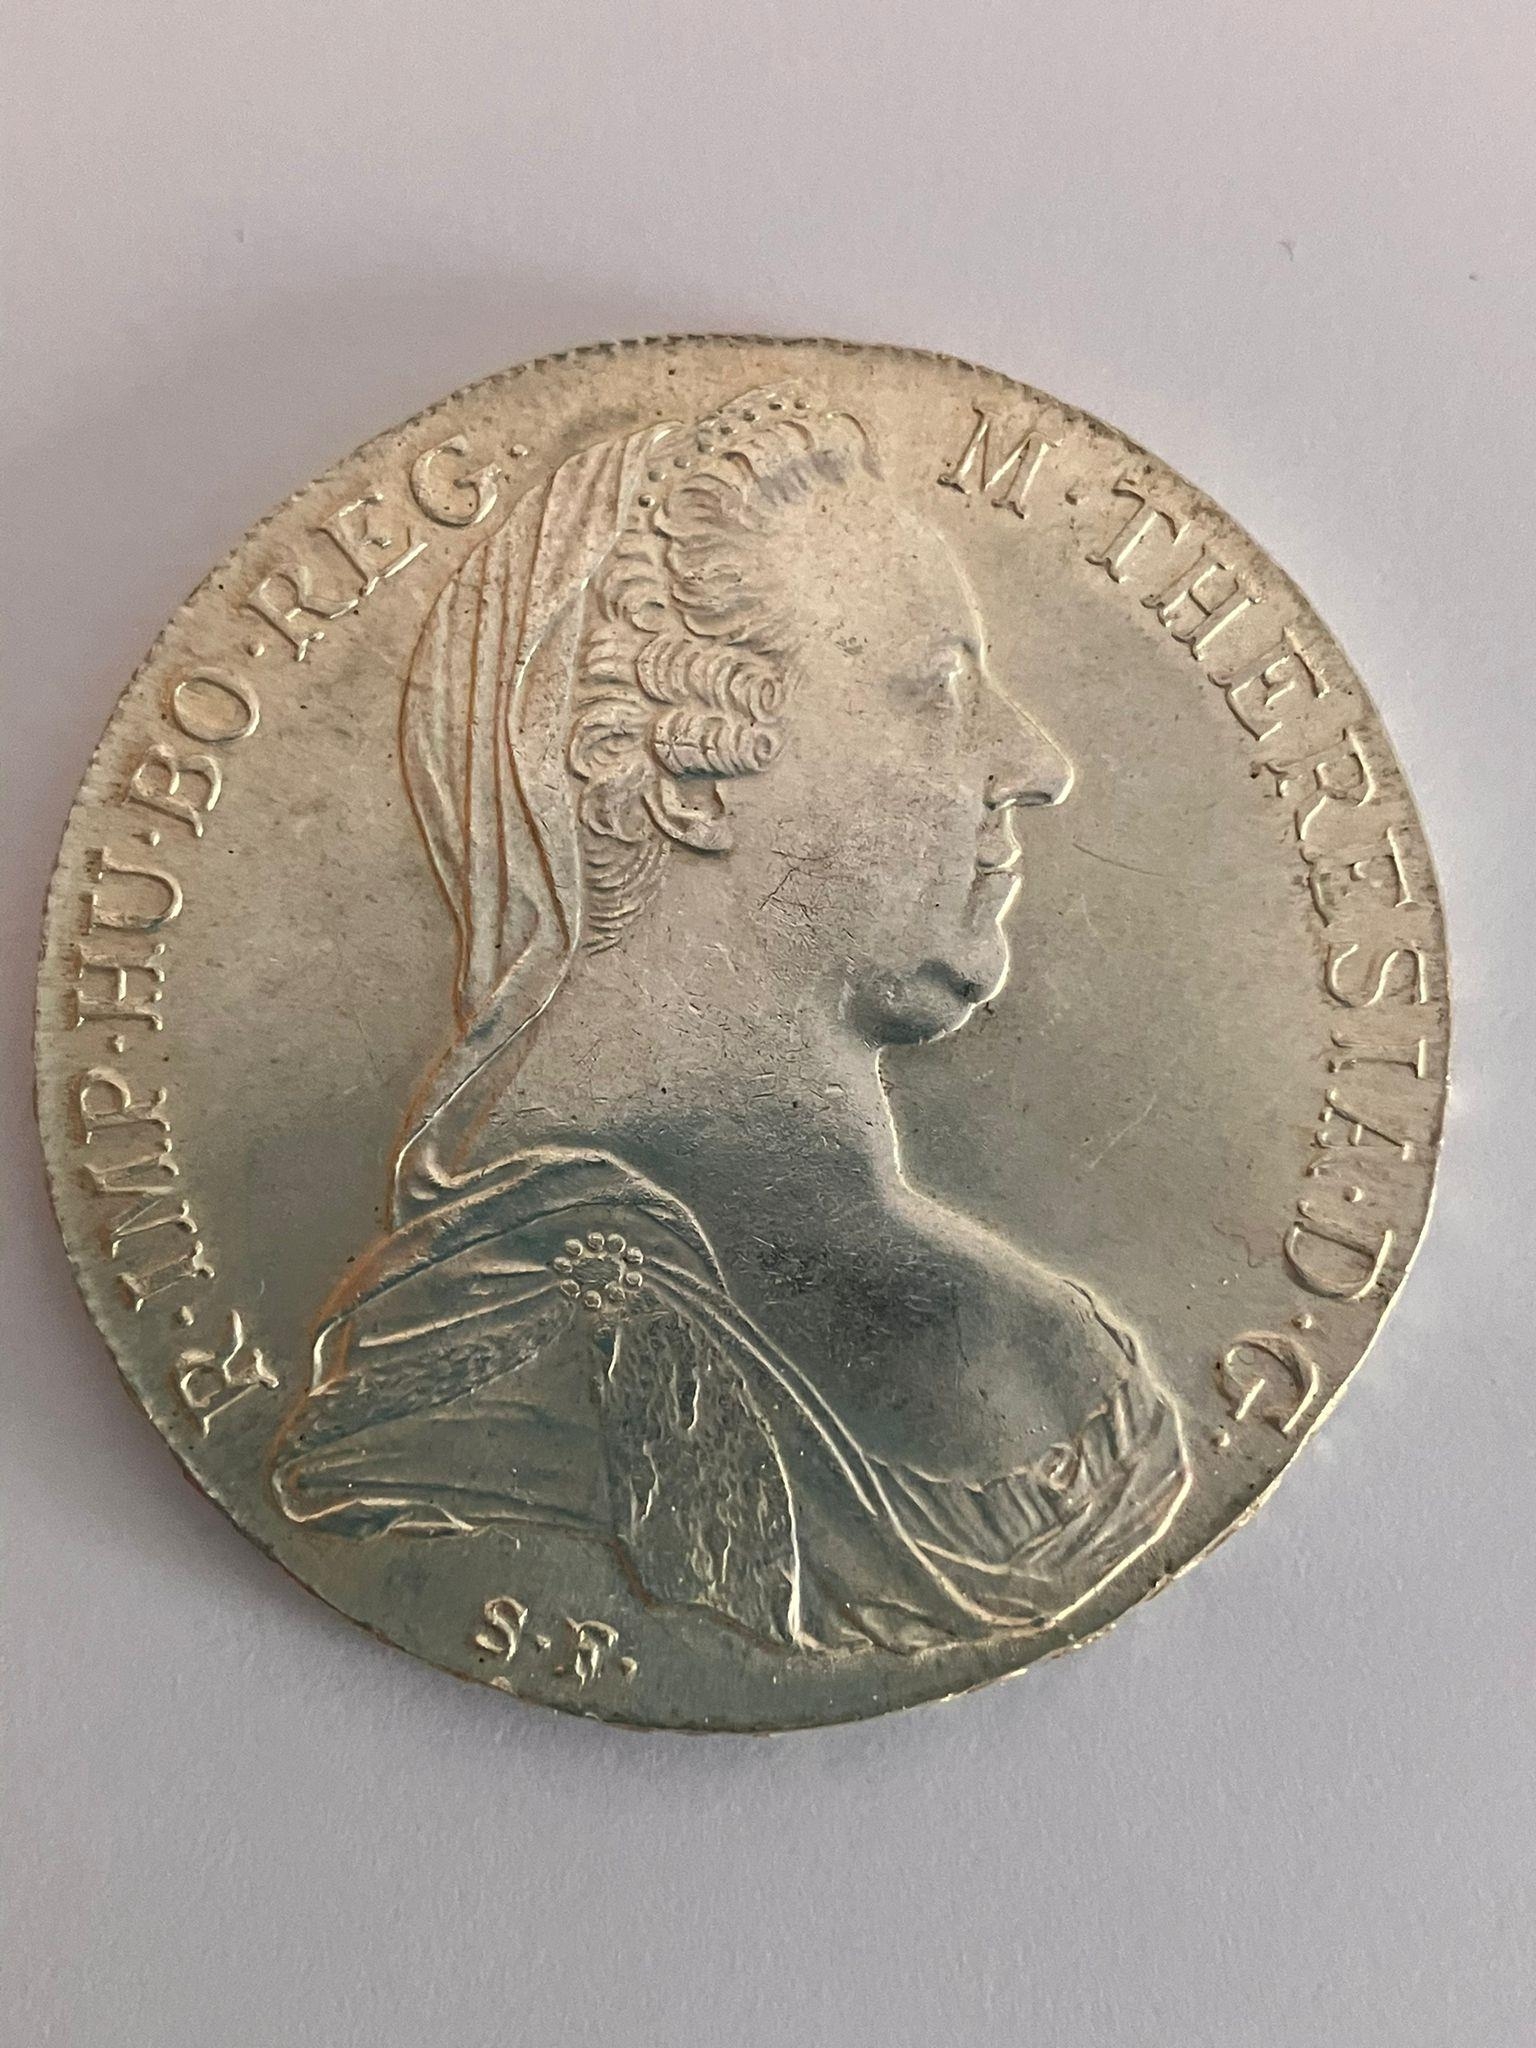 Vintage SILVER MARIE THERESA THALER COIN.1780. Conditioning as new and uncirculated. Extremely - Image 2 of 3